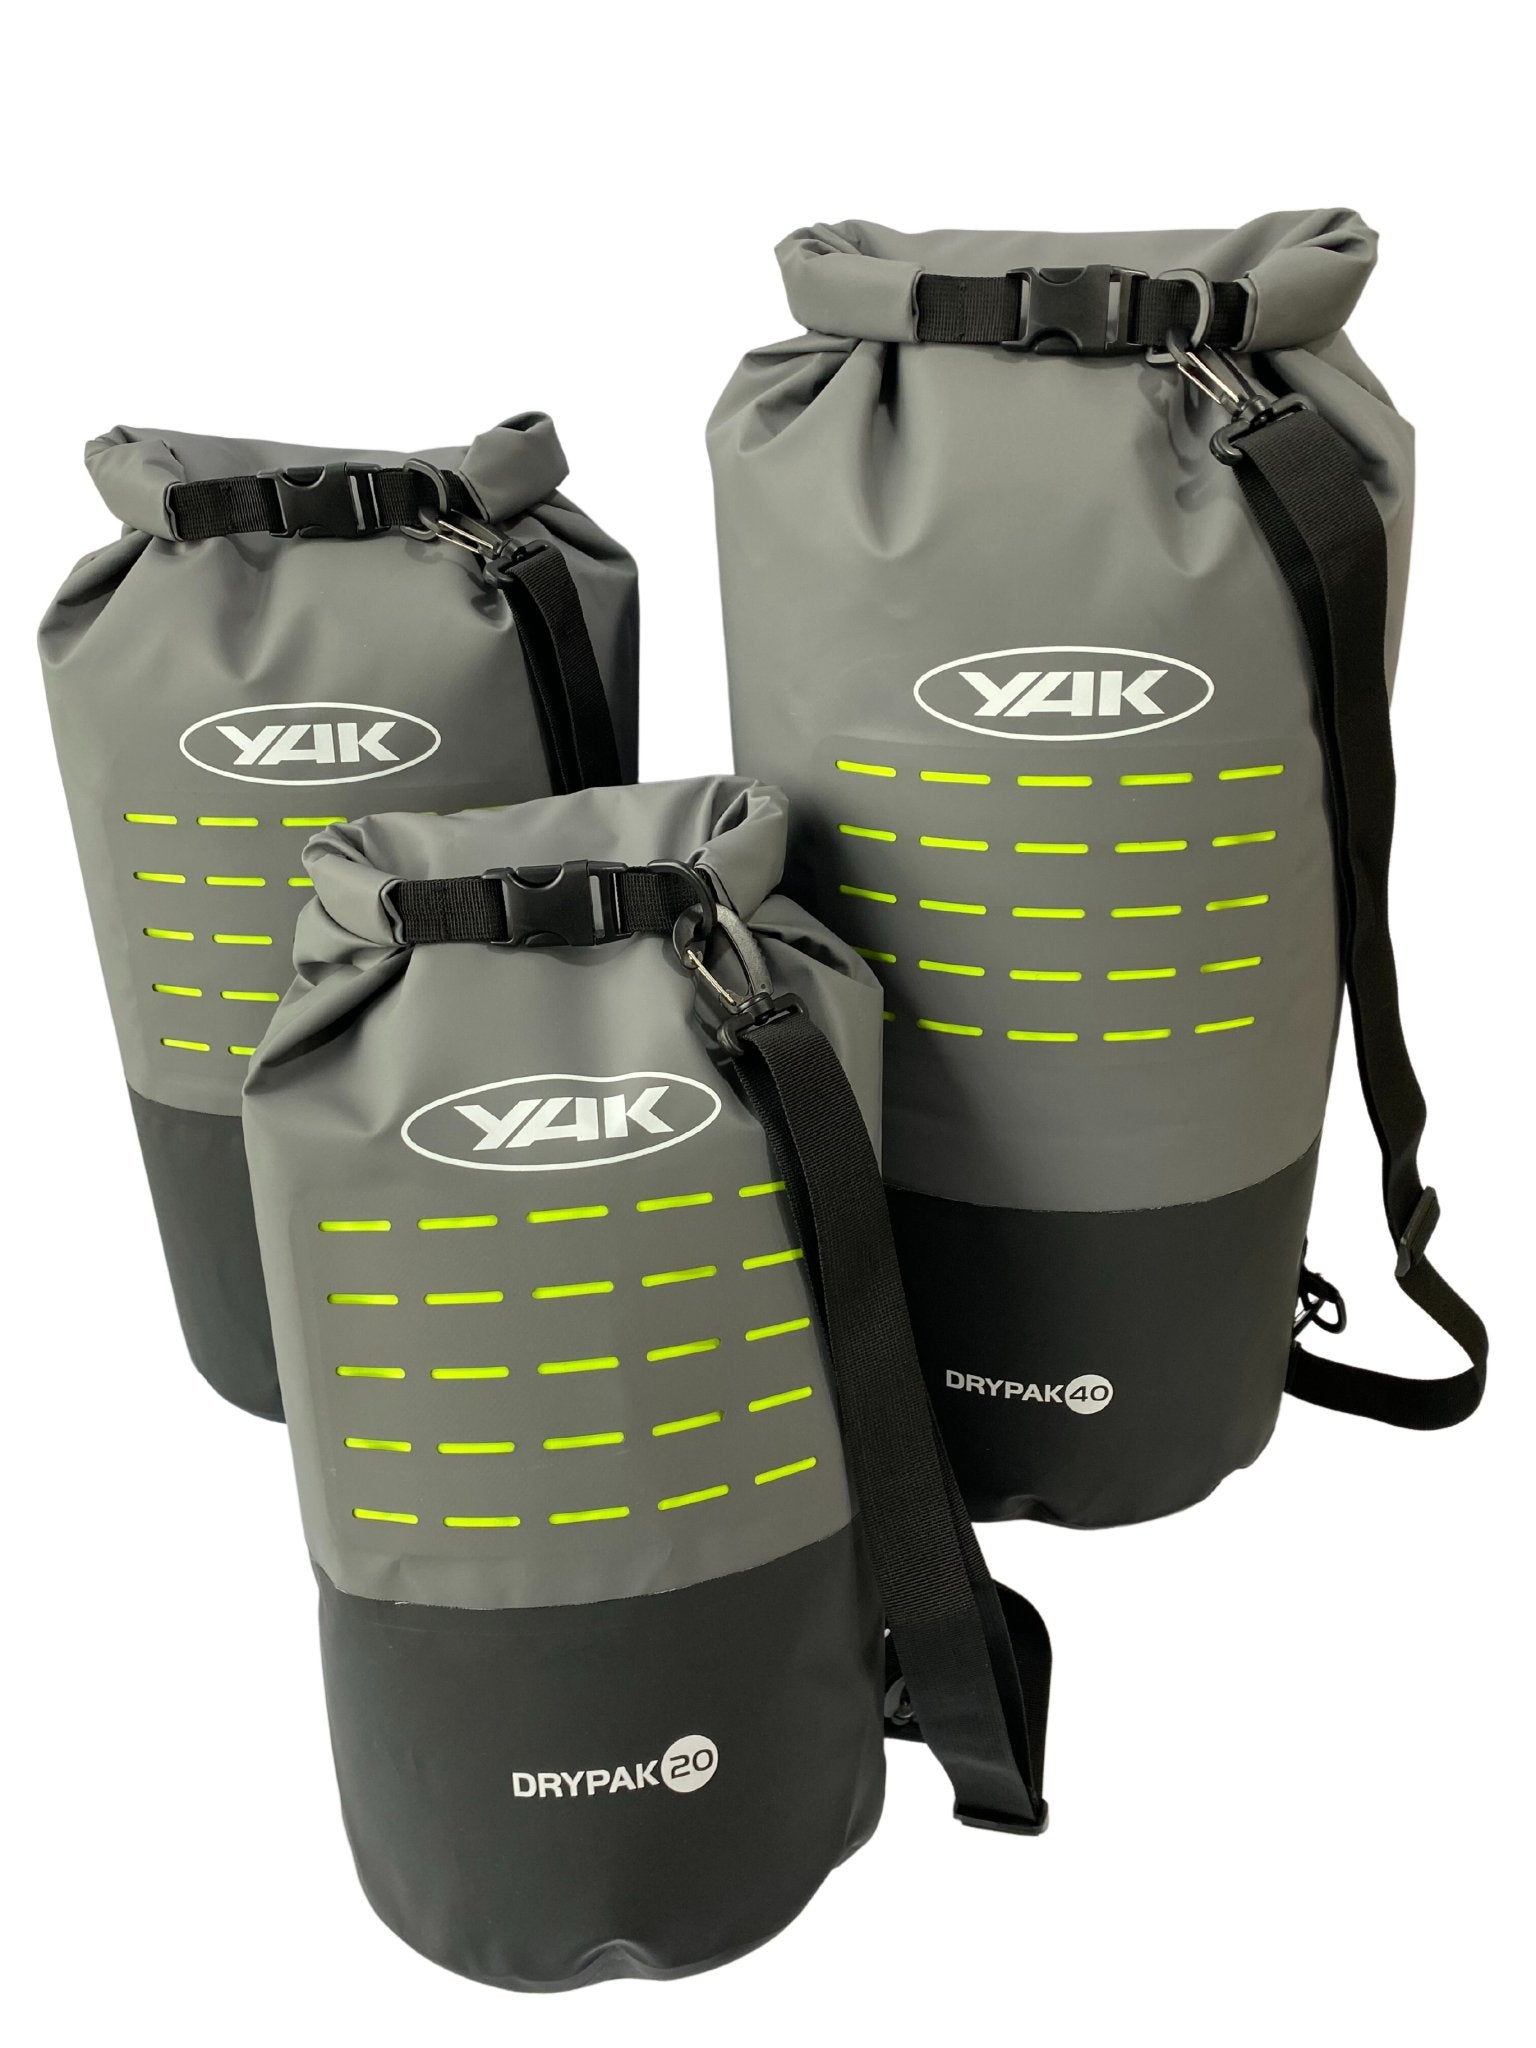 YAK Dry Bag with strap and MOLLE - Worthing Watersports - 7003334 - Dry Bags - YAK